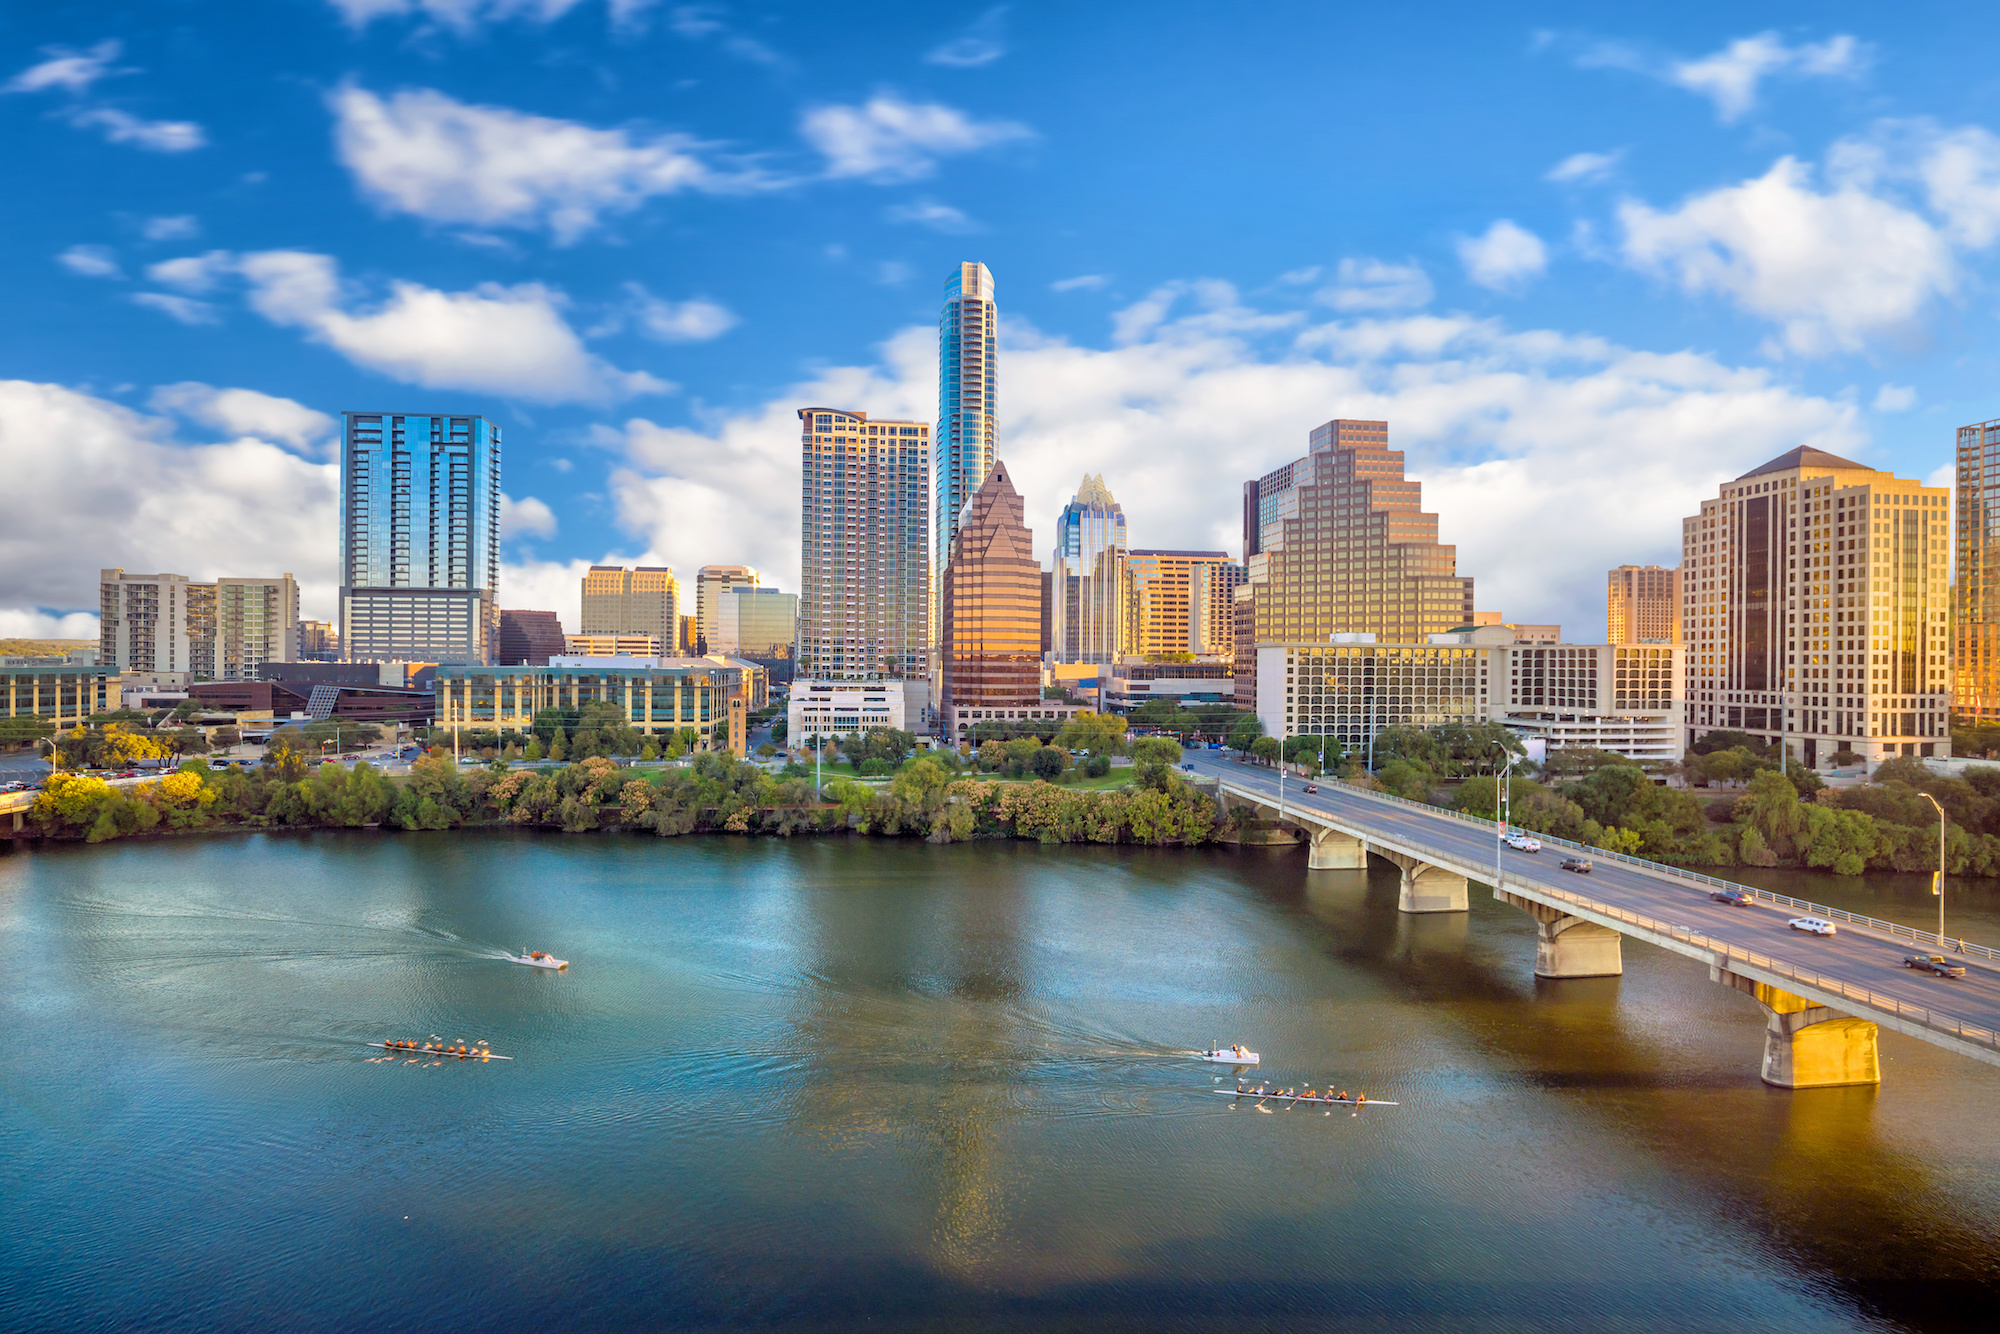 Landscape view of Austin, Texas overlooking the river.